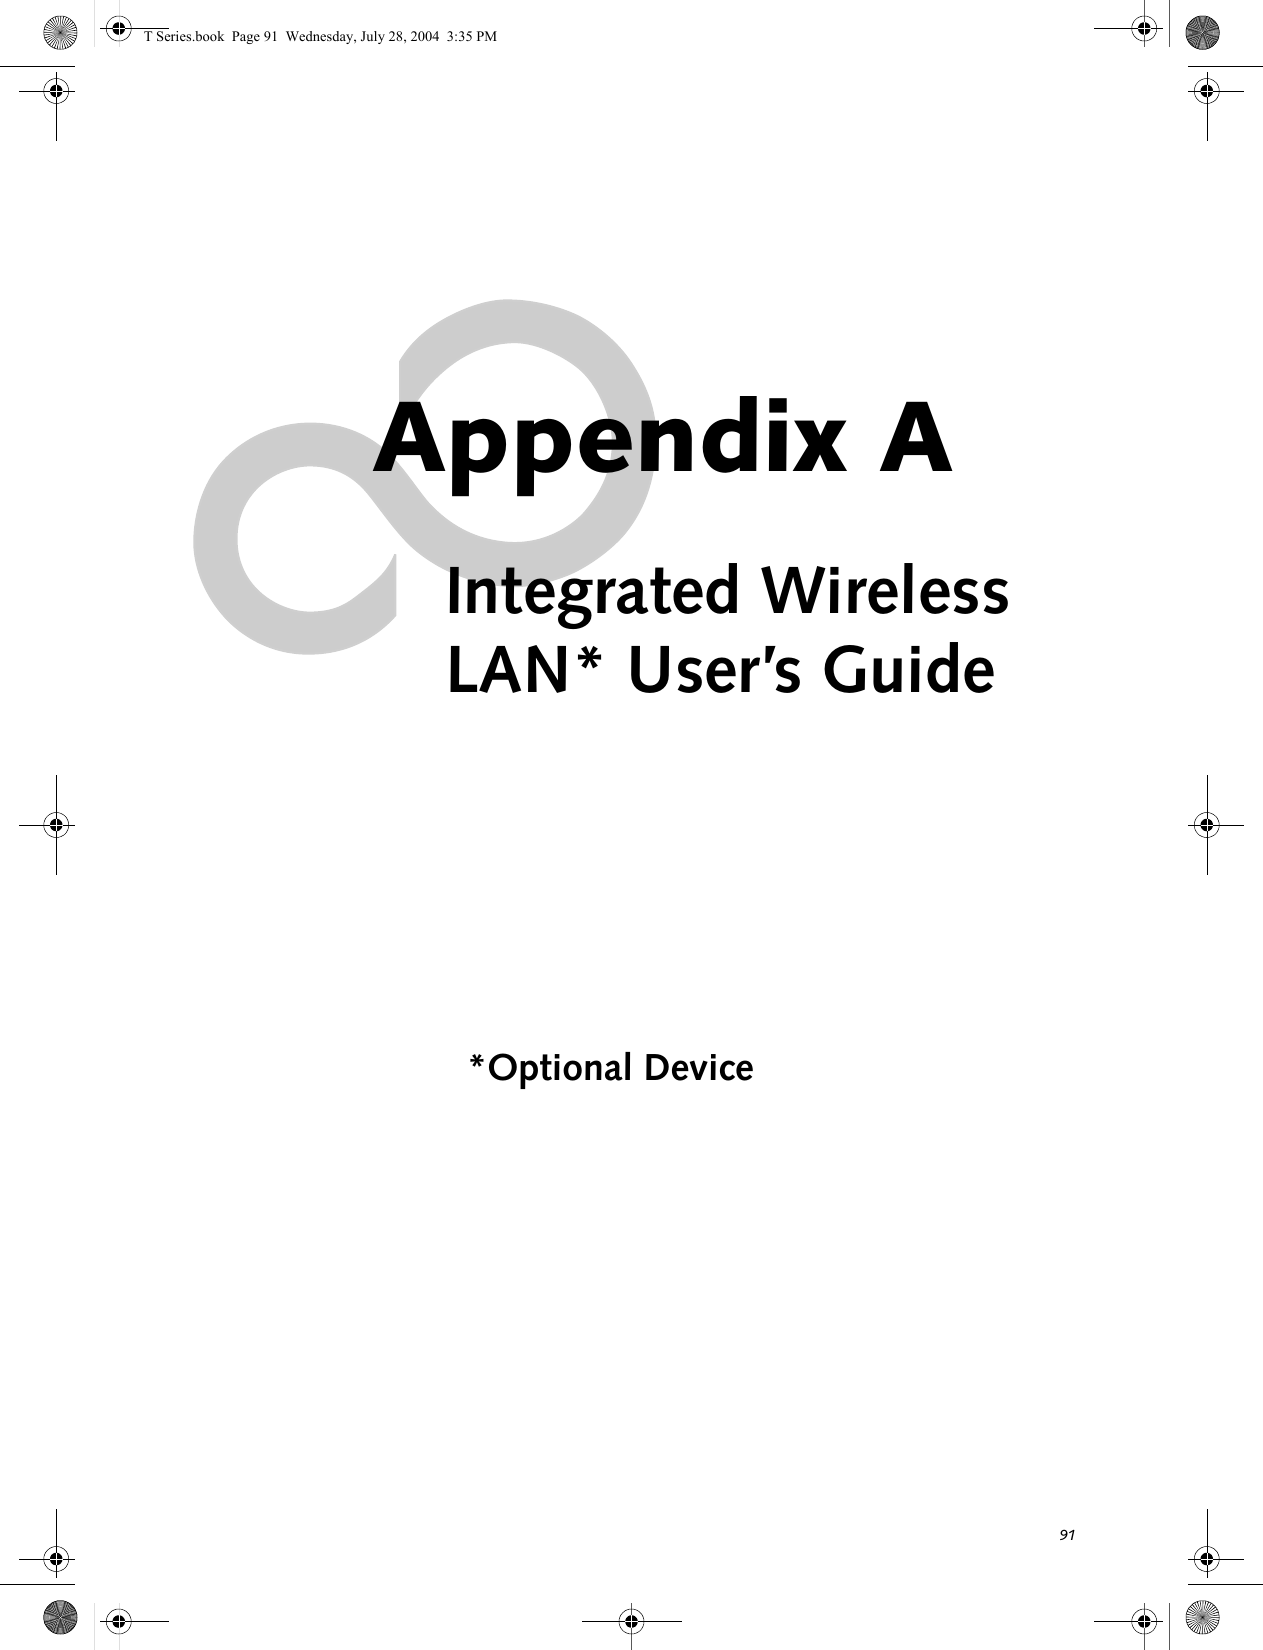 91Appendix AIntegrated WirelessLAN* User’s Guide*Optional DeviceT Series.book  Page 91  Wednesday, July 28, 2004  3:35 PM